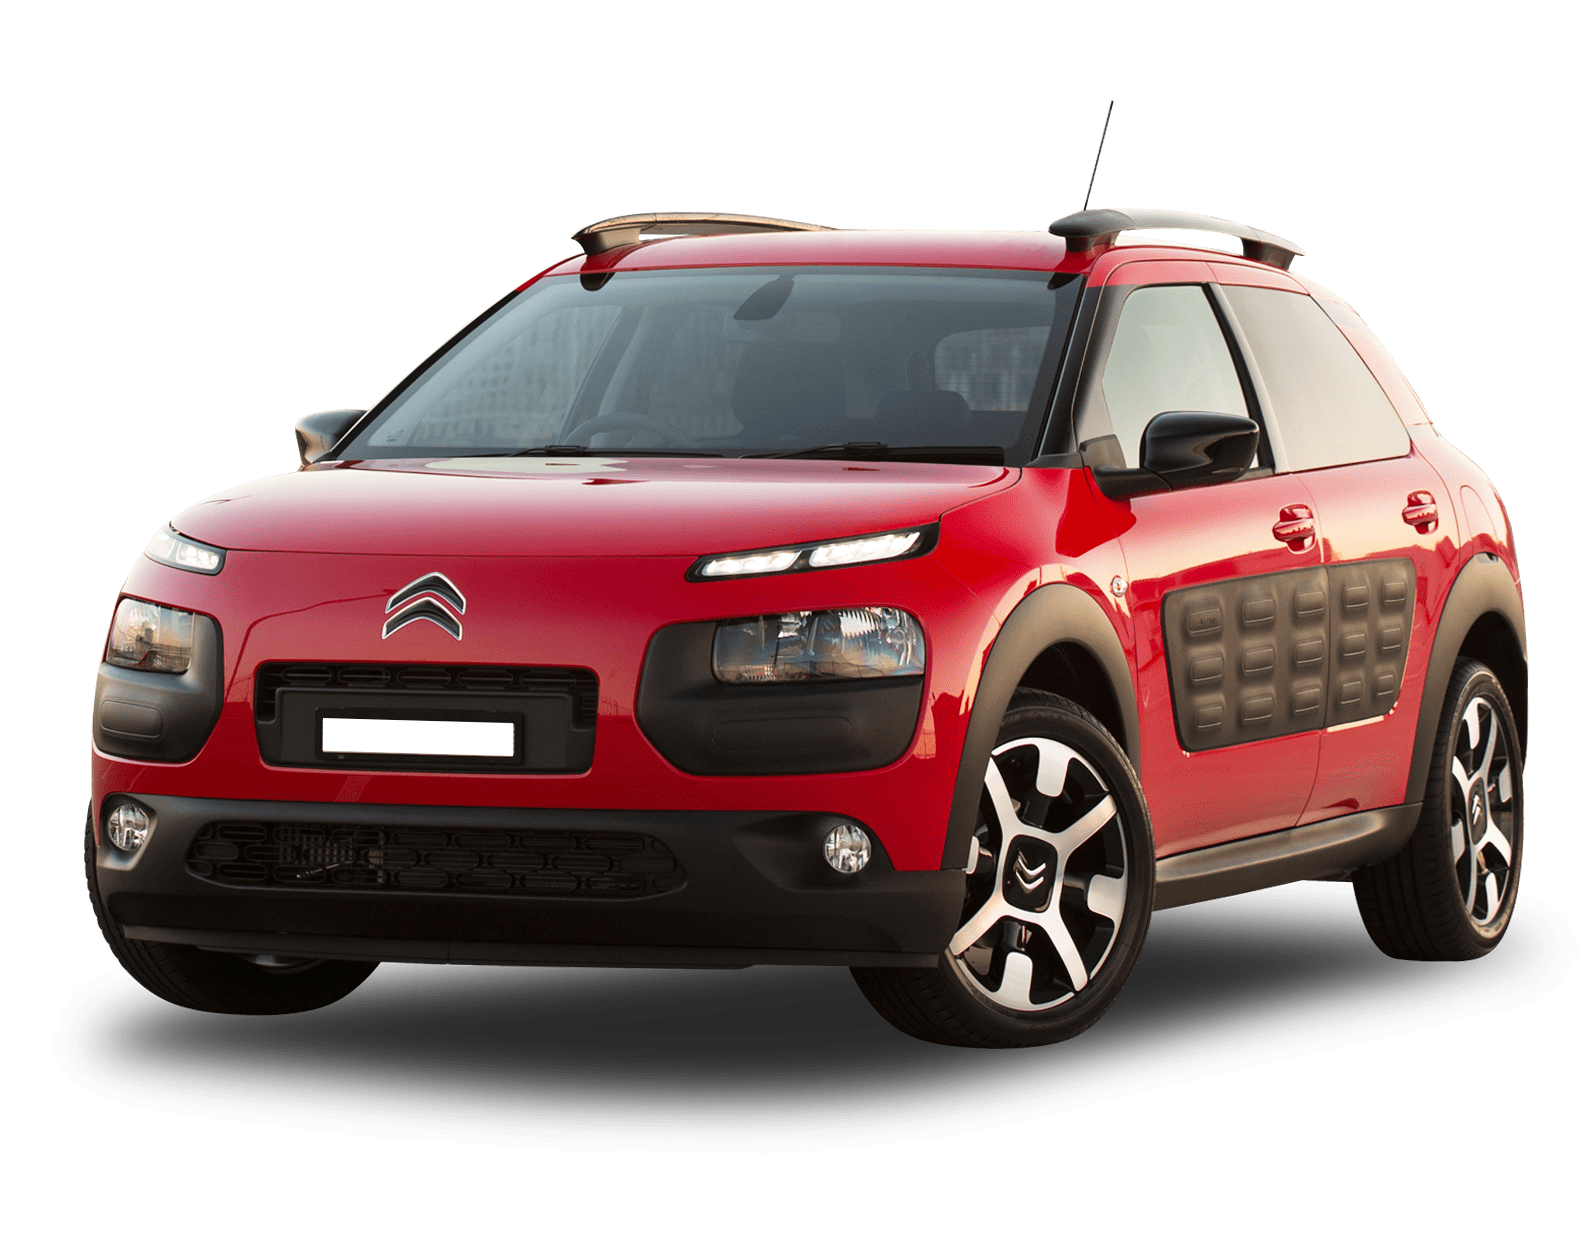 2018 Citroen C4 Cactus Exclusive Review  New Auto Transmission Adds To  Quality SUV - Drive